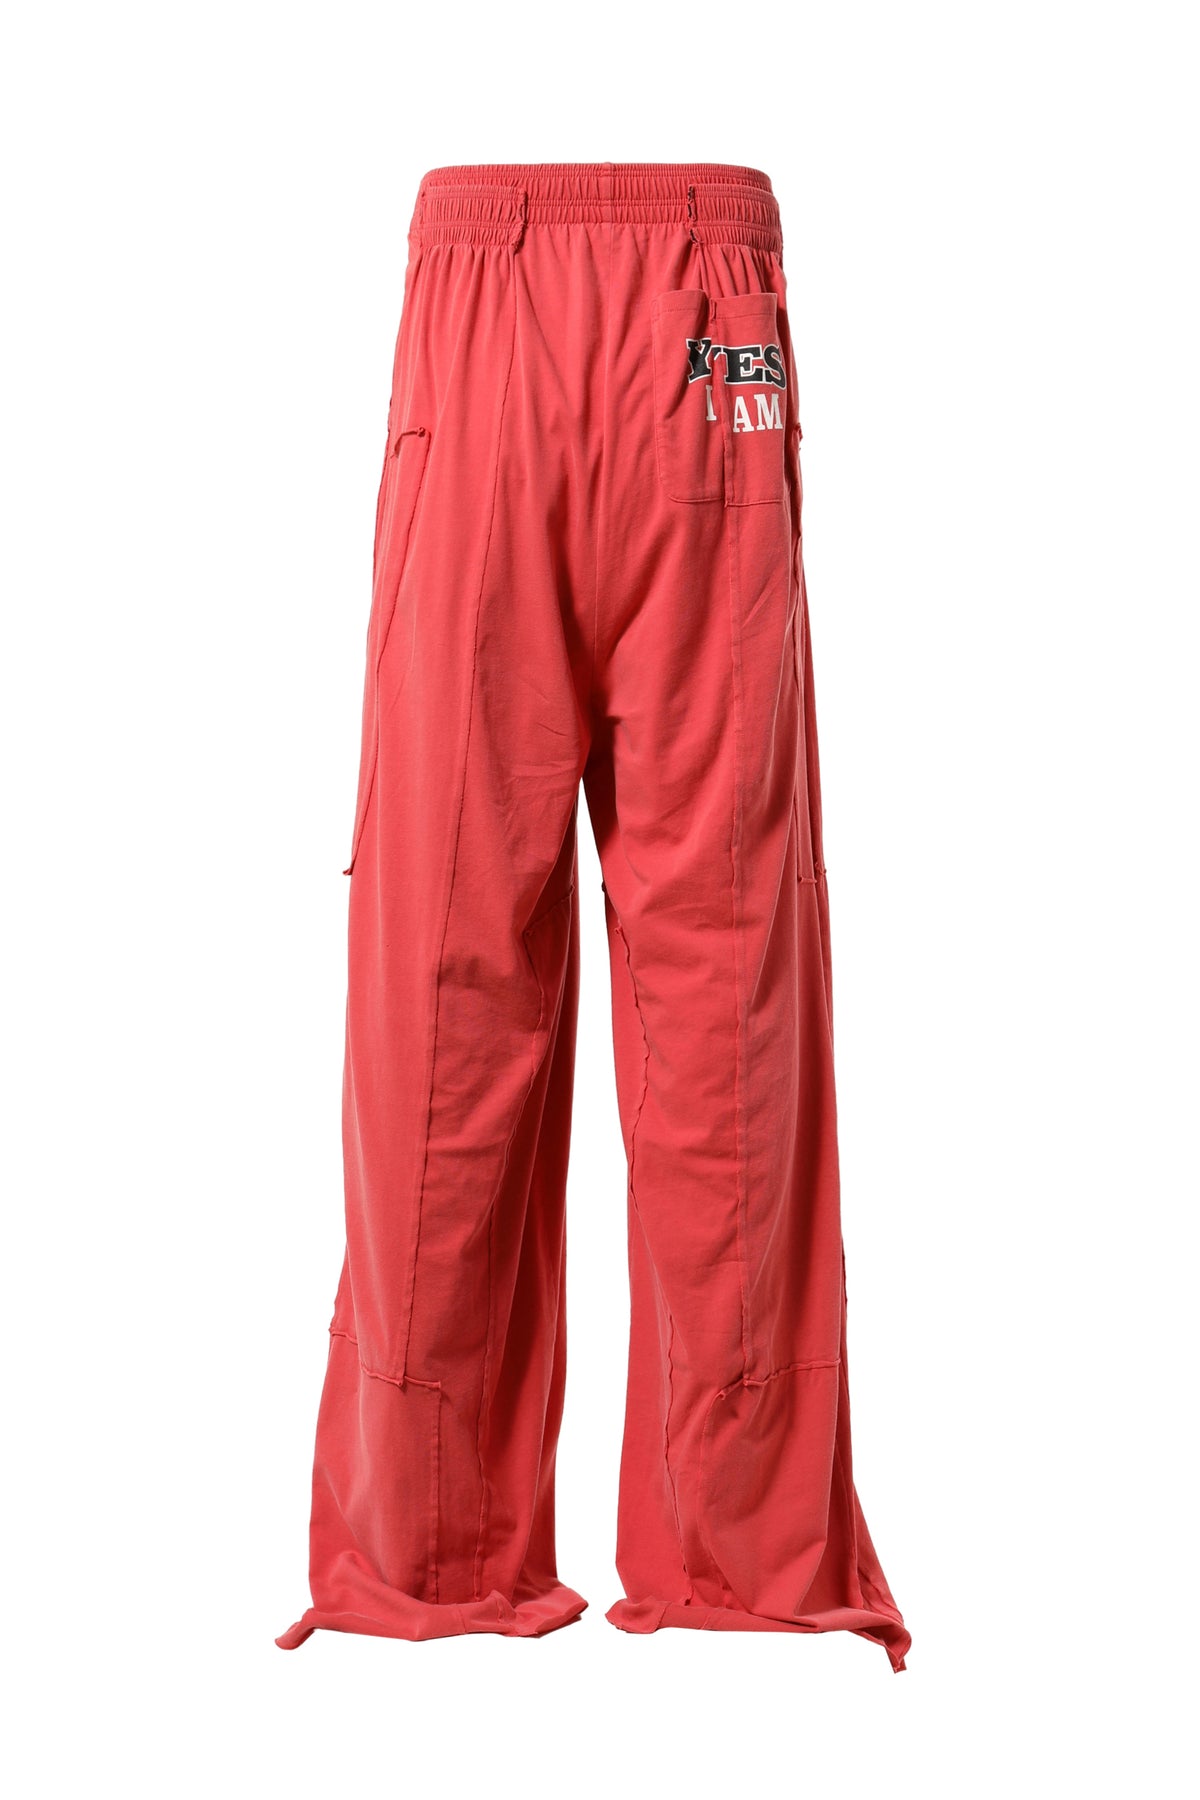 VETEMENTS FAN DECONSTRUCTED SWEATPANTS / WASHED RED